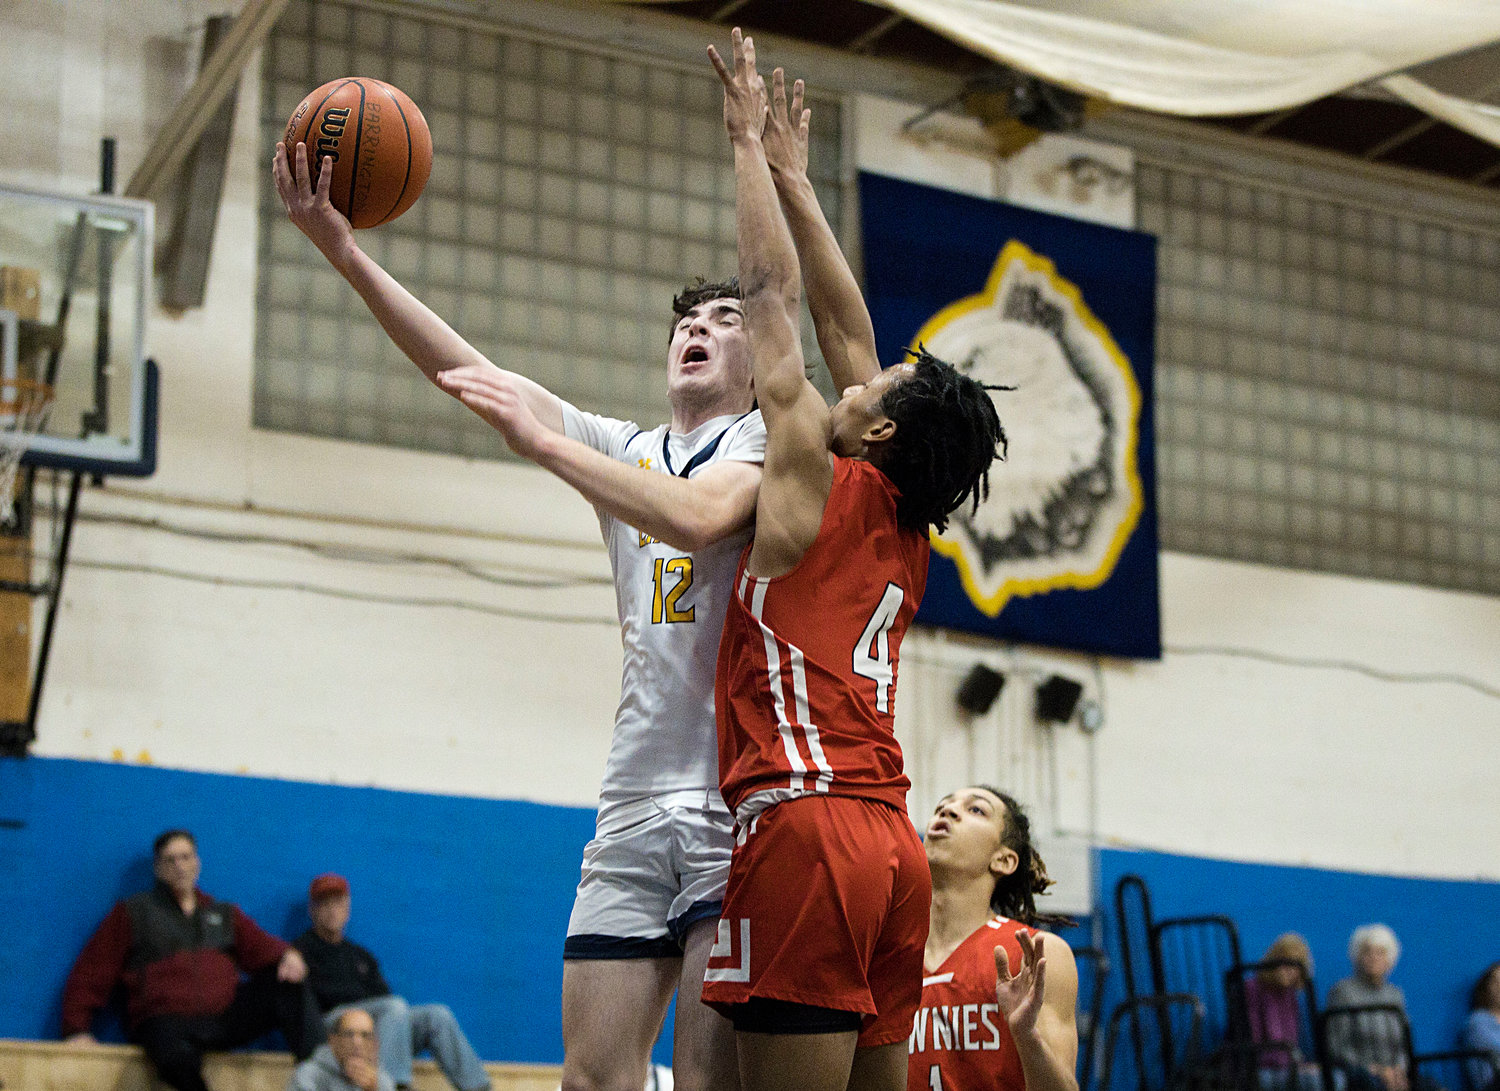 Dan Coogan goes up for a shot while guarded closely by an East Providence defender.